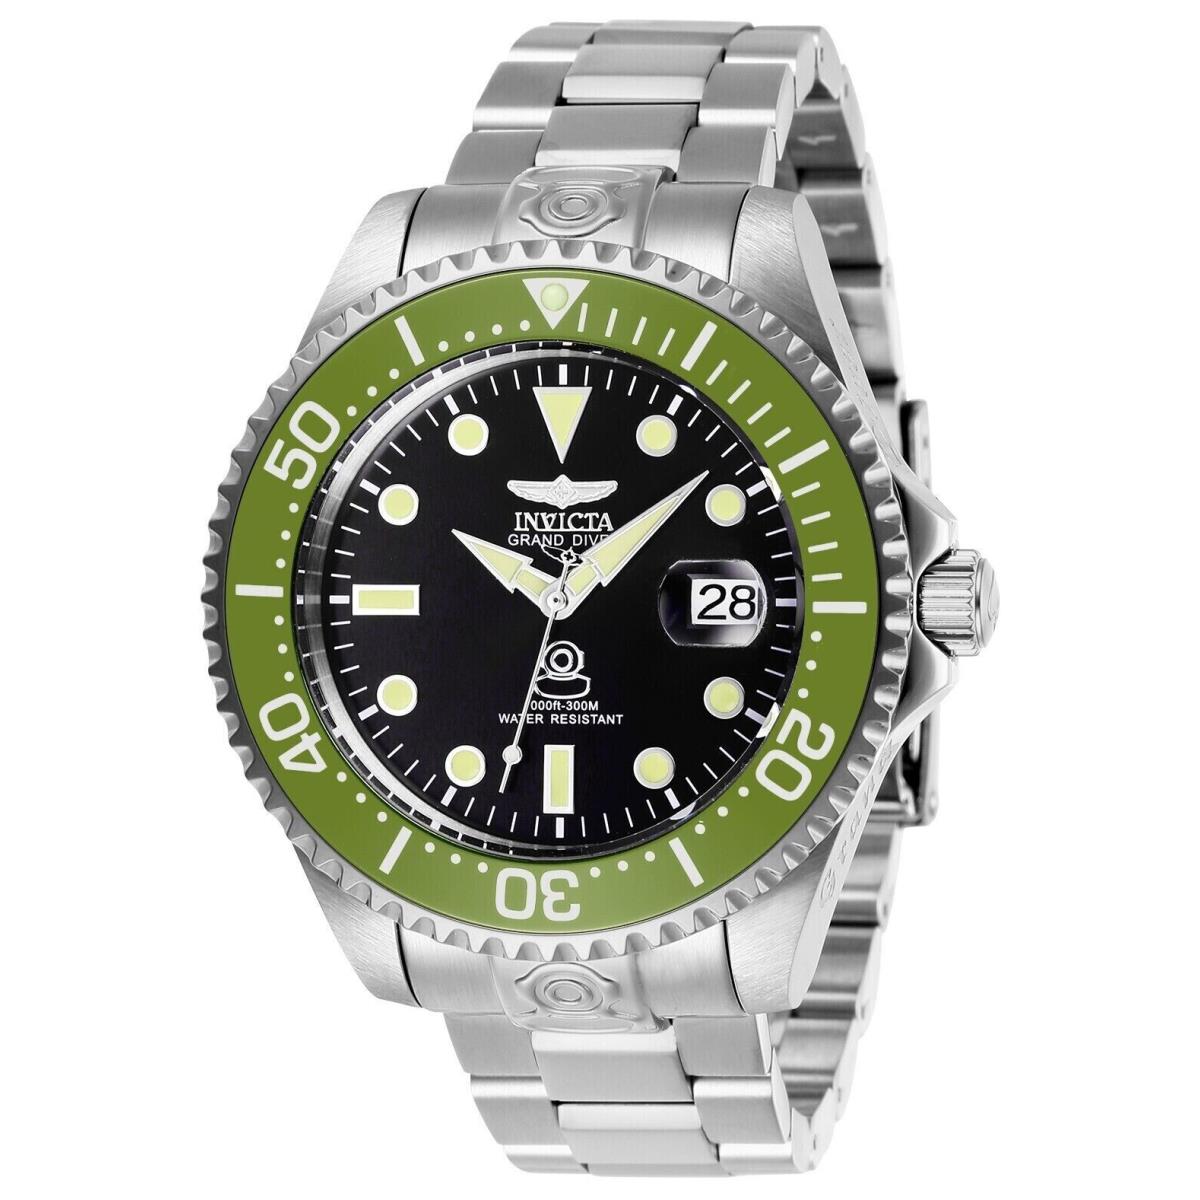 Invicta Grand Diver Black/green Dial Mechanical/automatic Men`s Watch - 27612